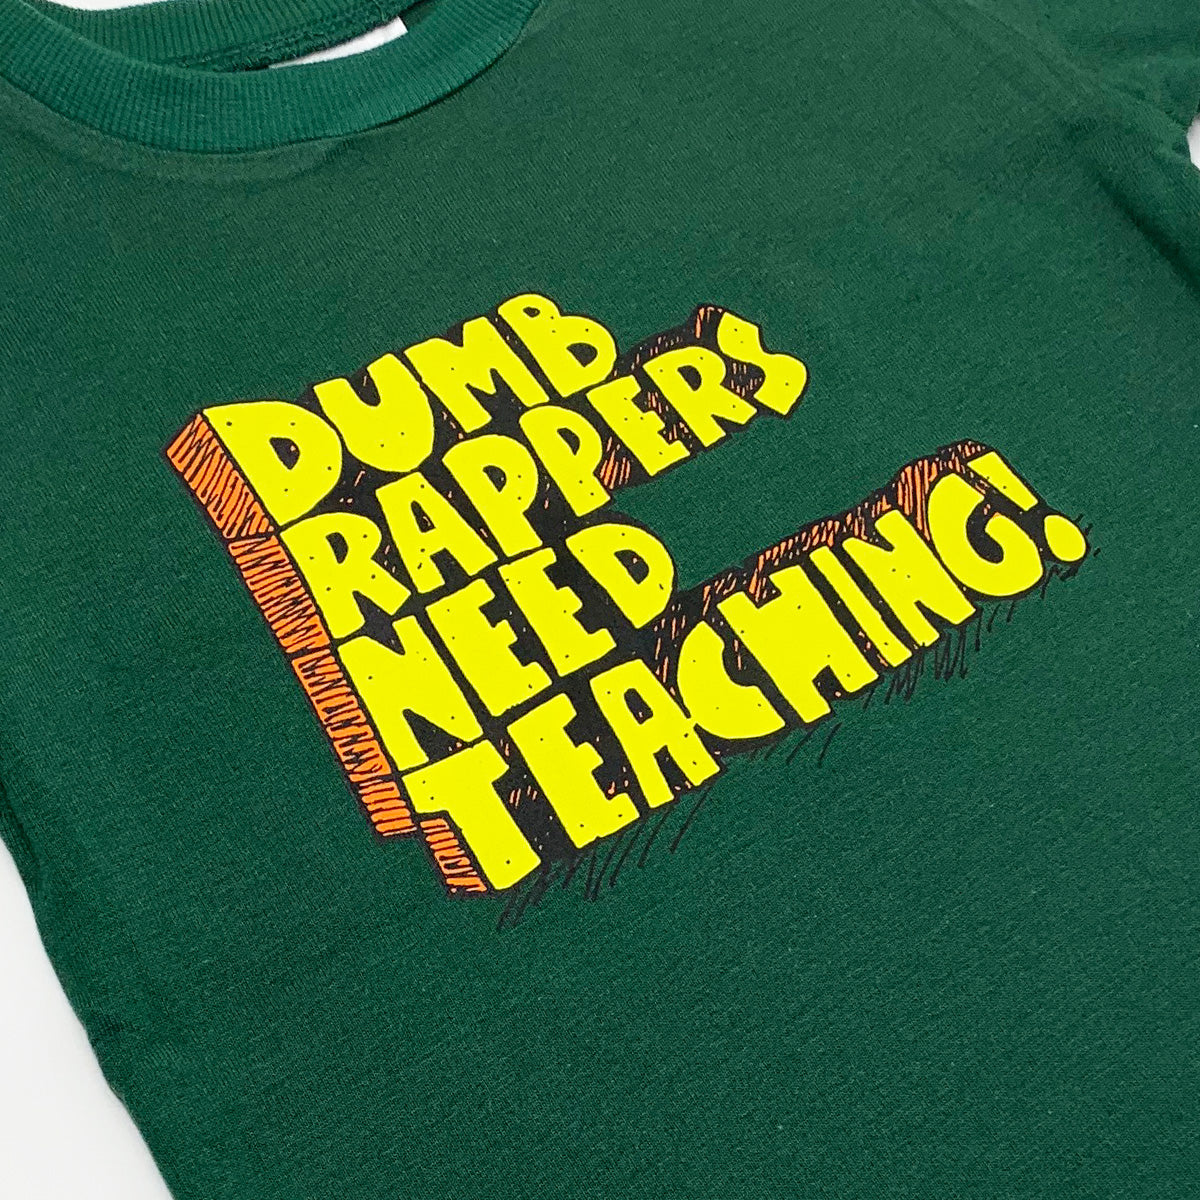 Rappers Need Teaching T-Shirt (Kale)